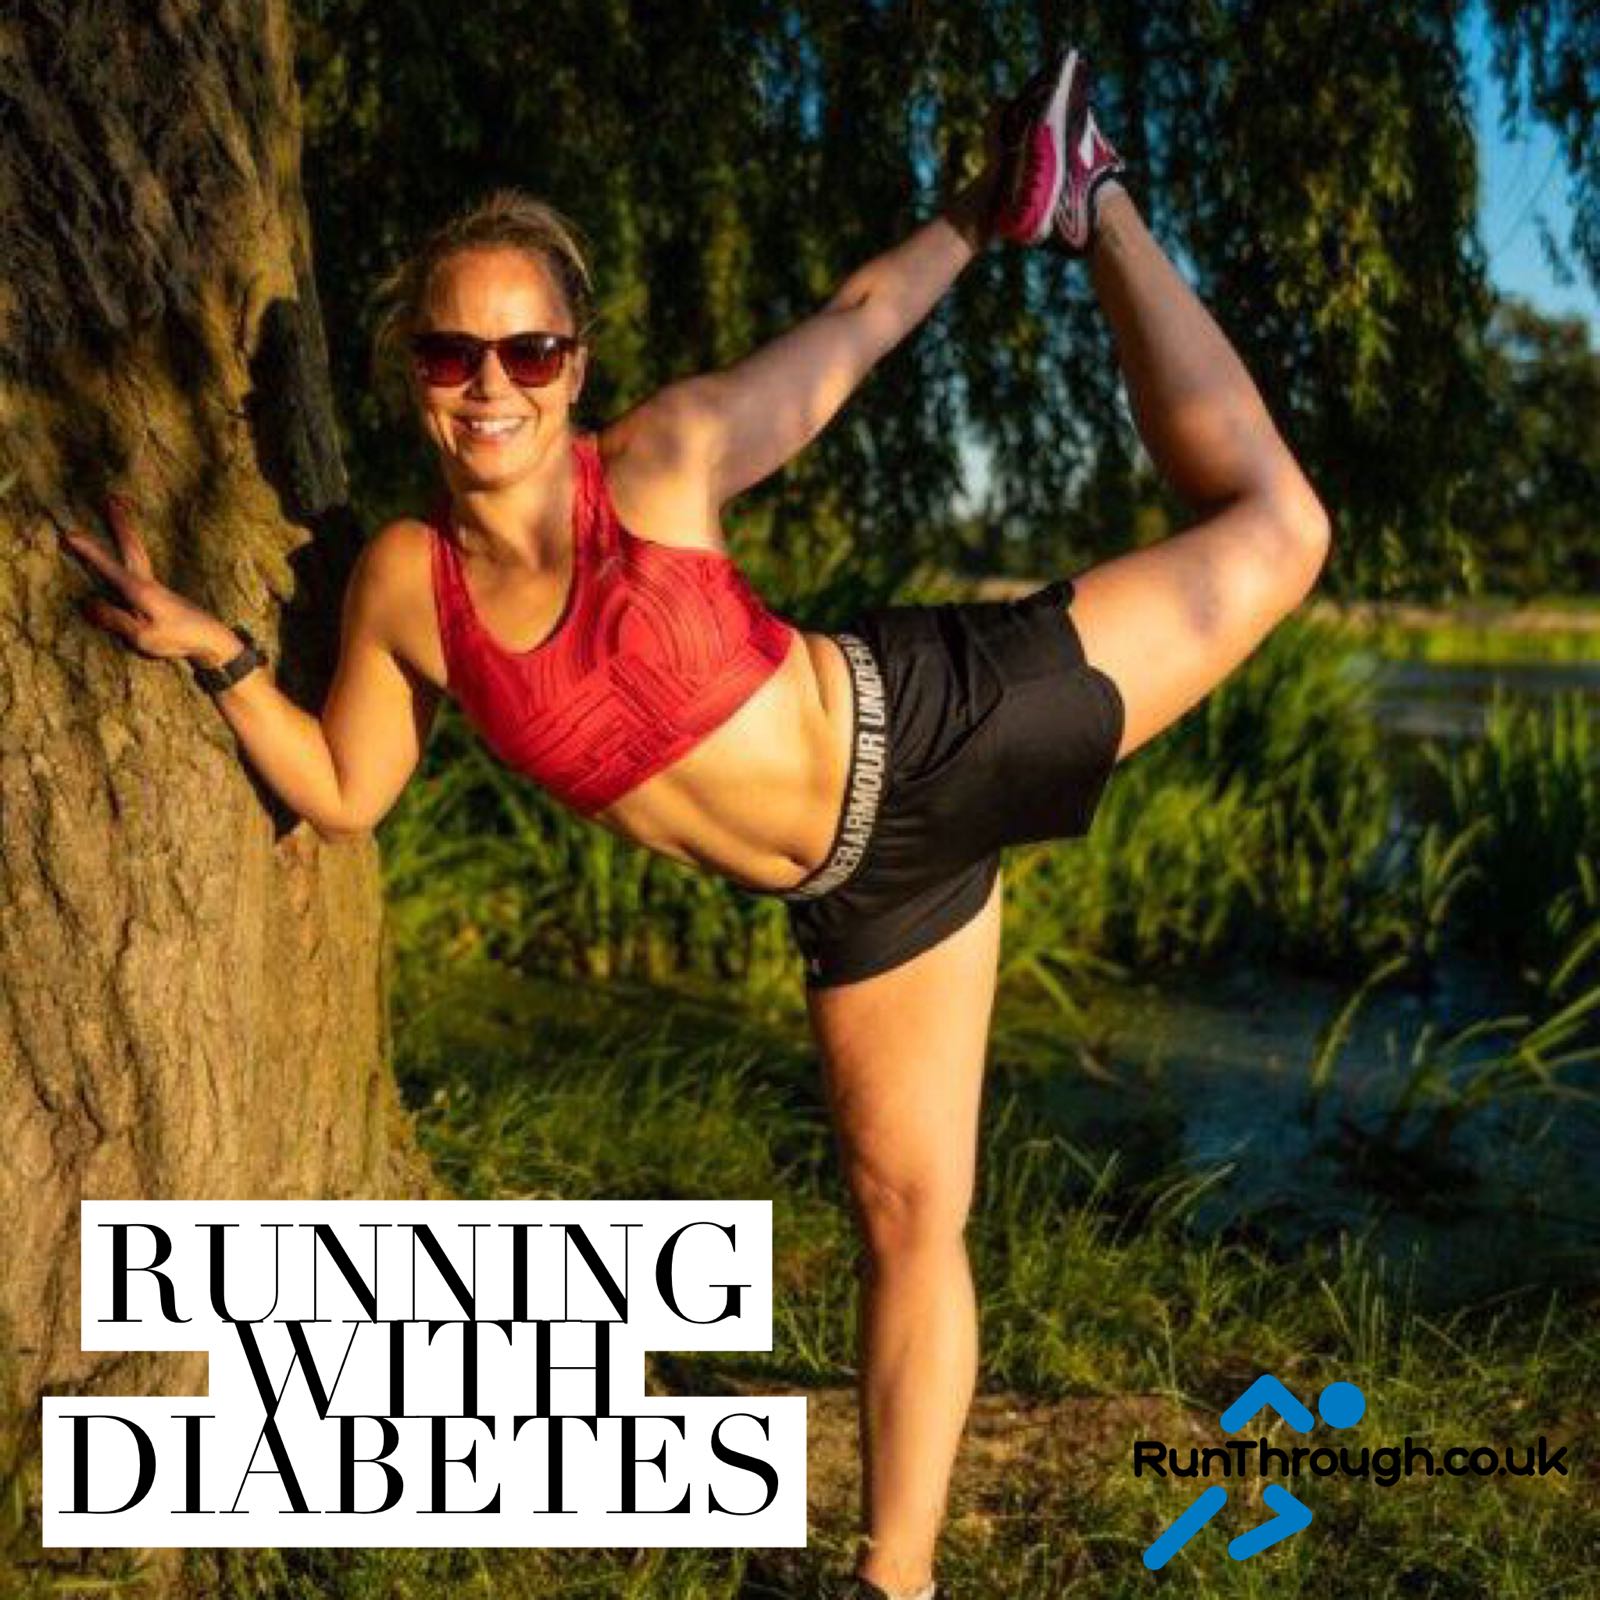 Running with diabetes